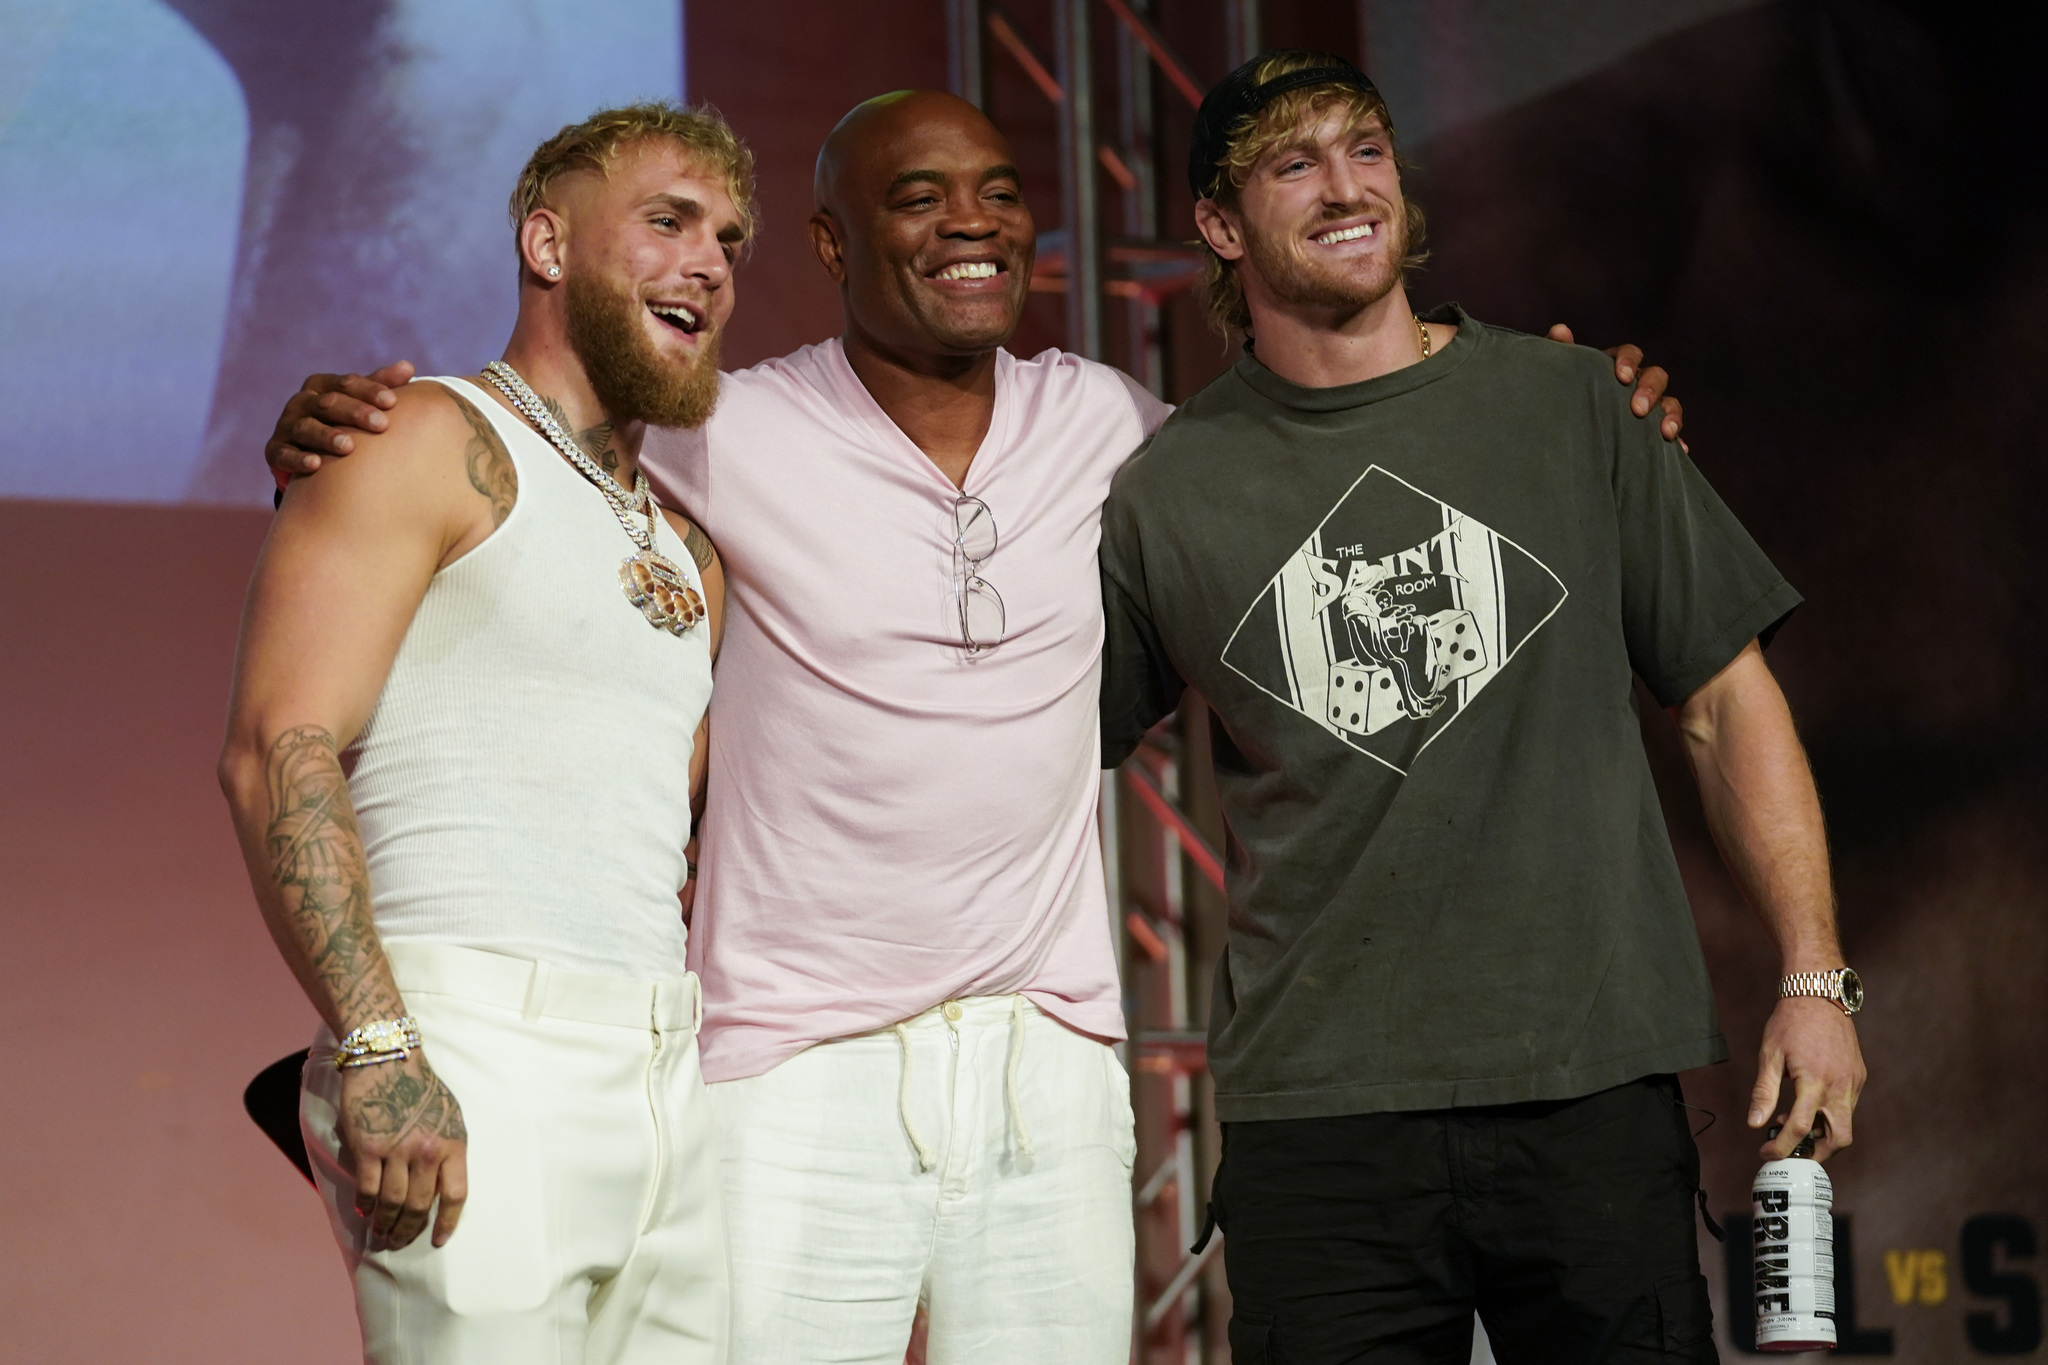 The Paul brothers and Anderson Silva